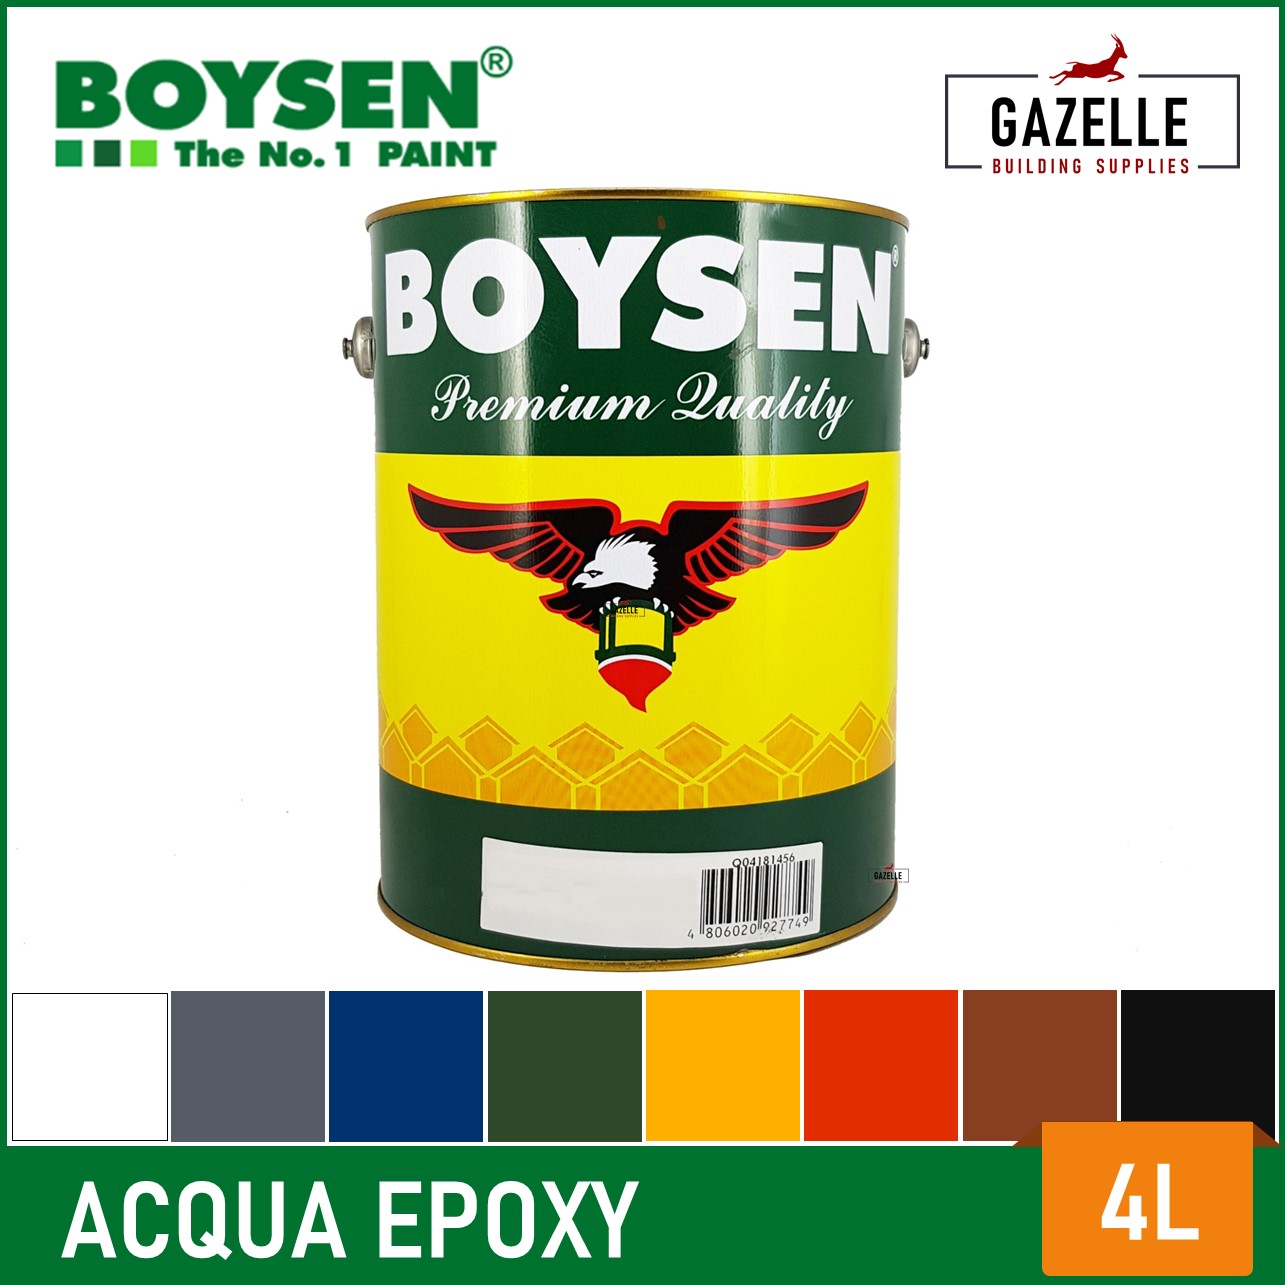 Pacific Paint (Boysen) Philippines, Inc., - Specialty Water Based Coatings  - BOYSEN<sup>®</sup> Chalk It™ Water-based Chalkboard Paint 